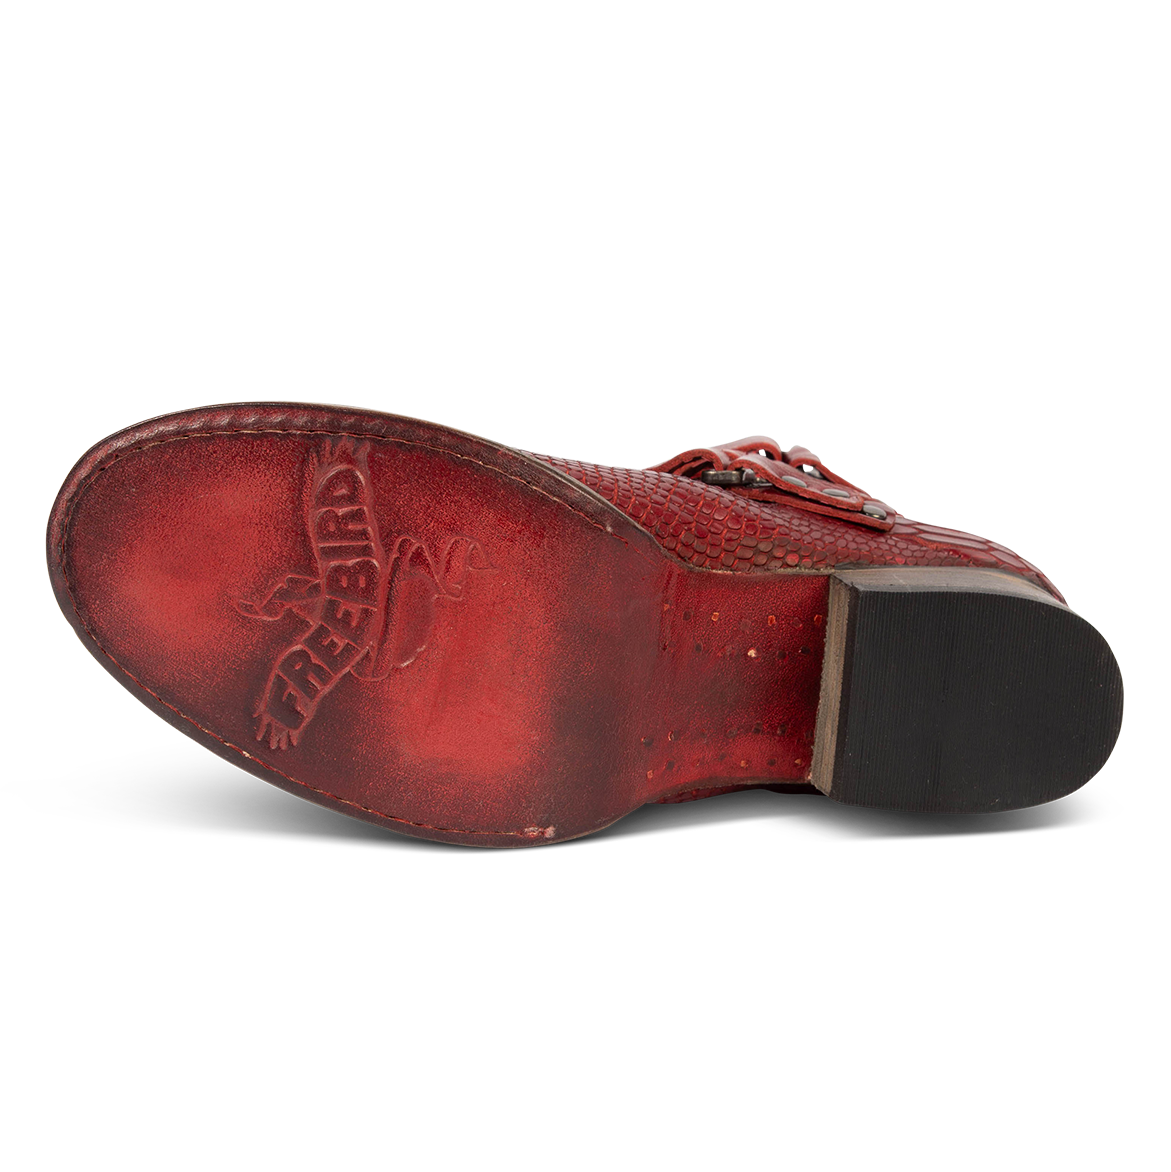 Leather sole imprinted with FREEBIRD on women's Grecko red leather ankle bootie